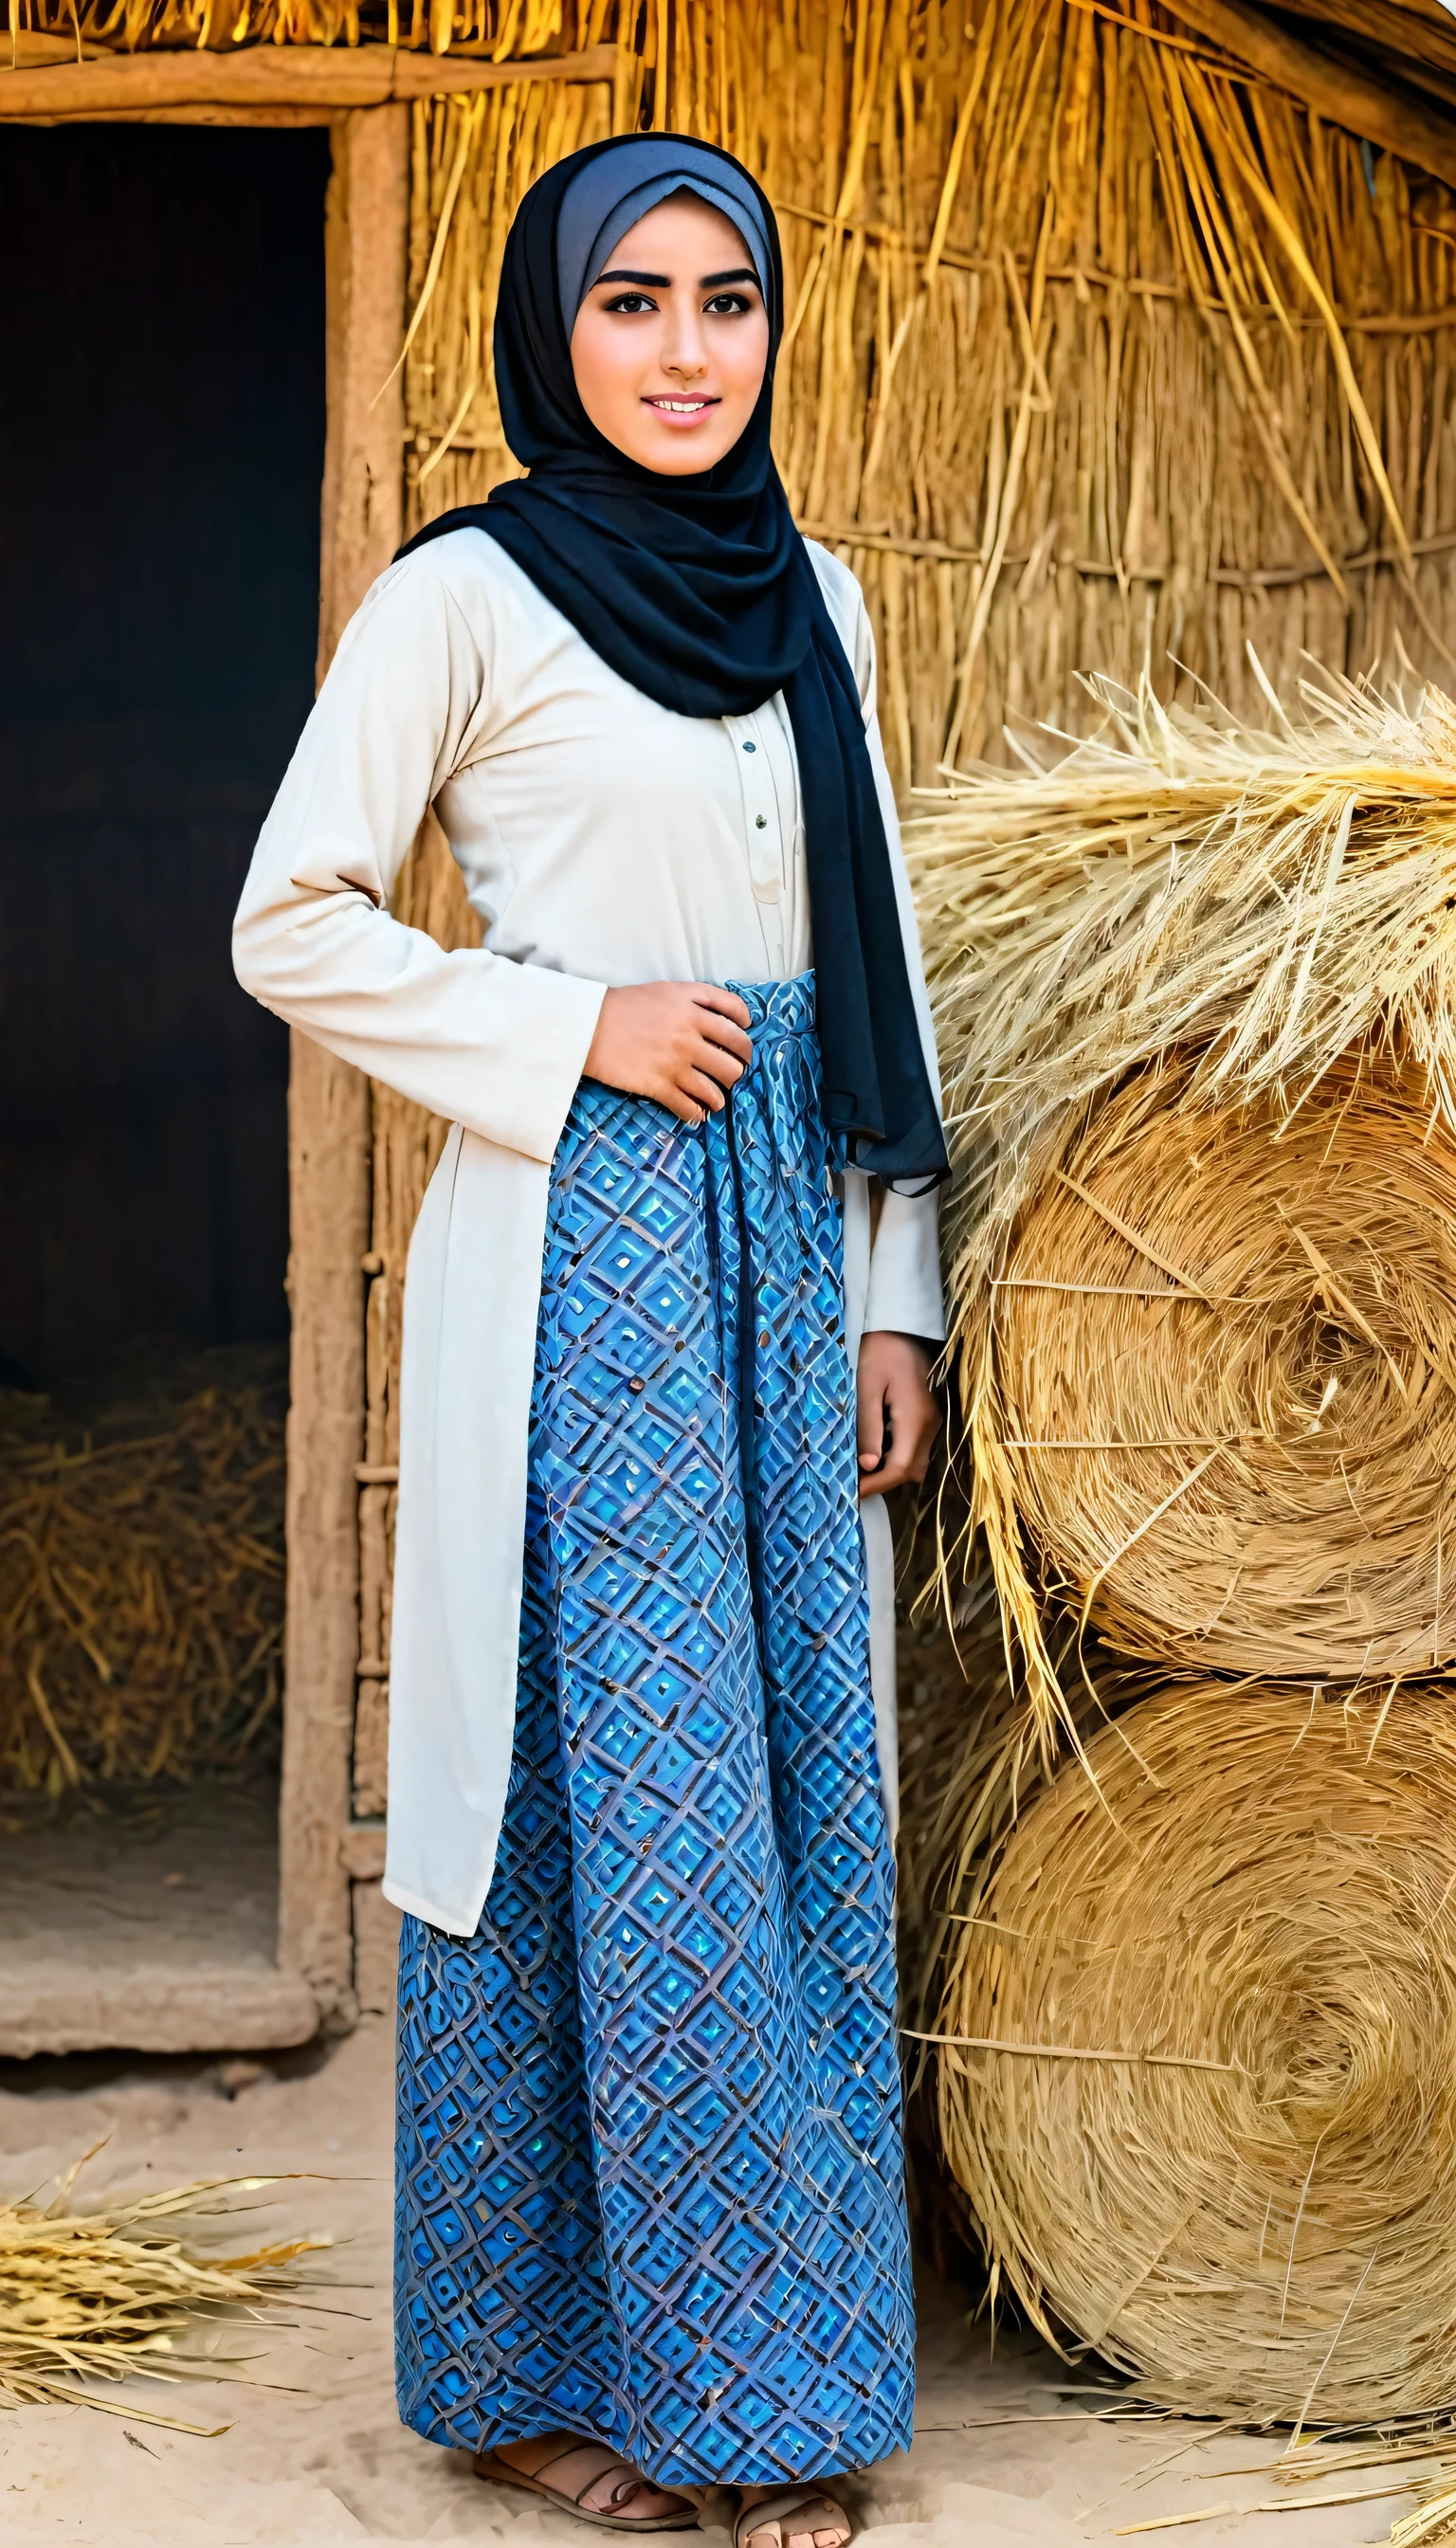 1girl, solo, an Iraqi  wearing traditional clothing at the theshold of a hut, wearing hijab, background includes hay and outdoor elements, black_hair, standing, looking_at_viewer